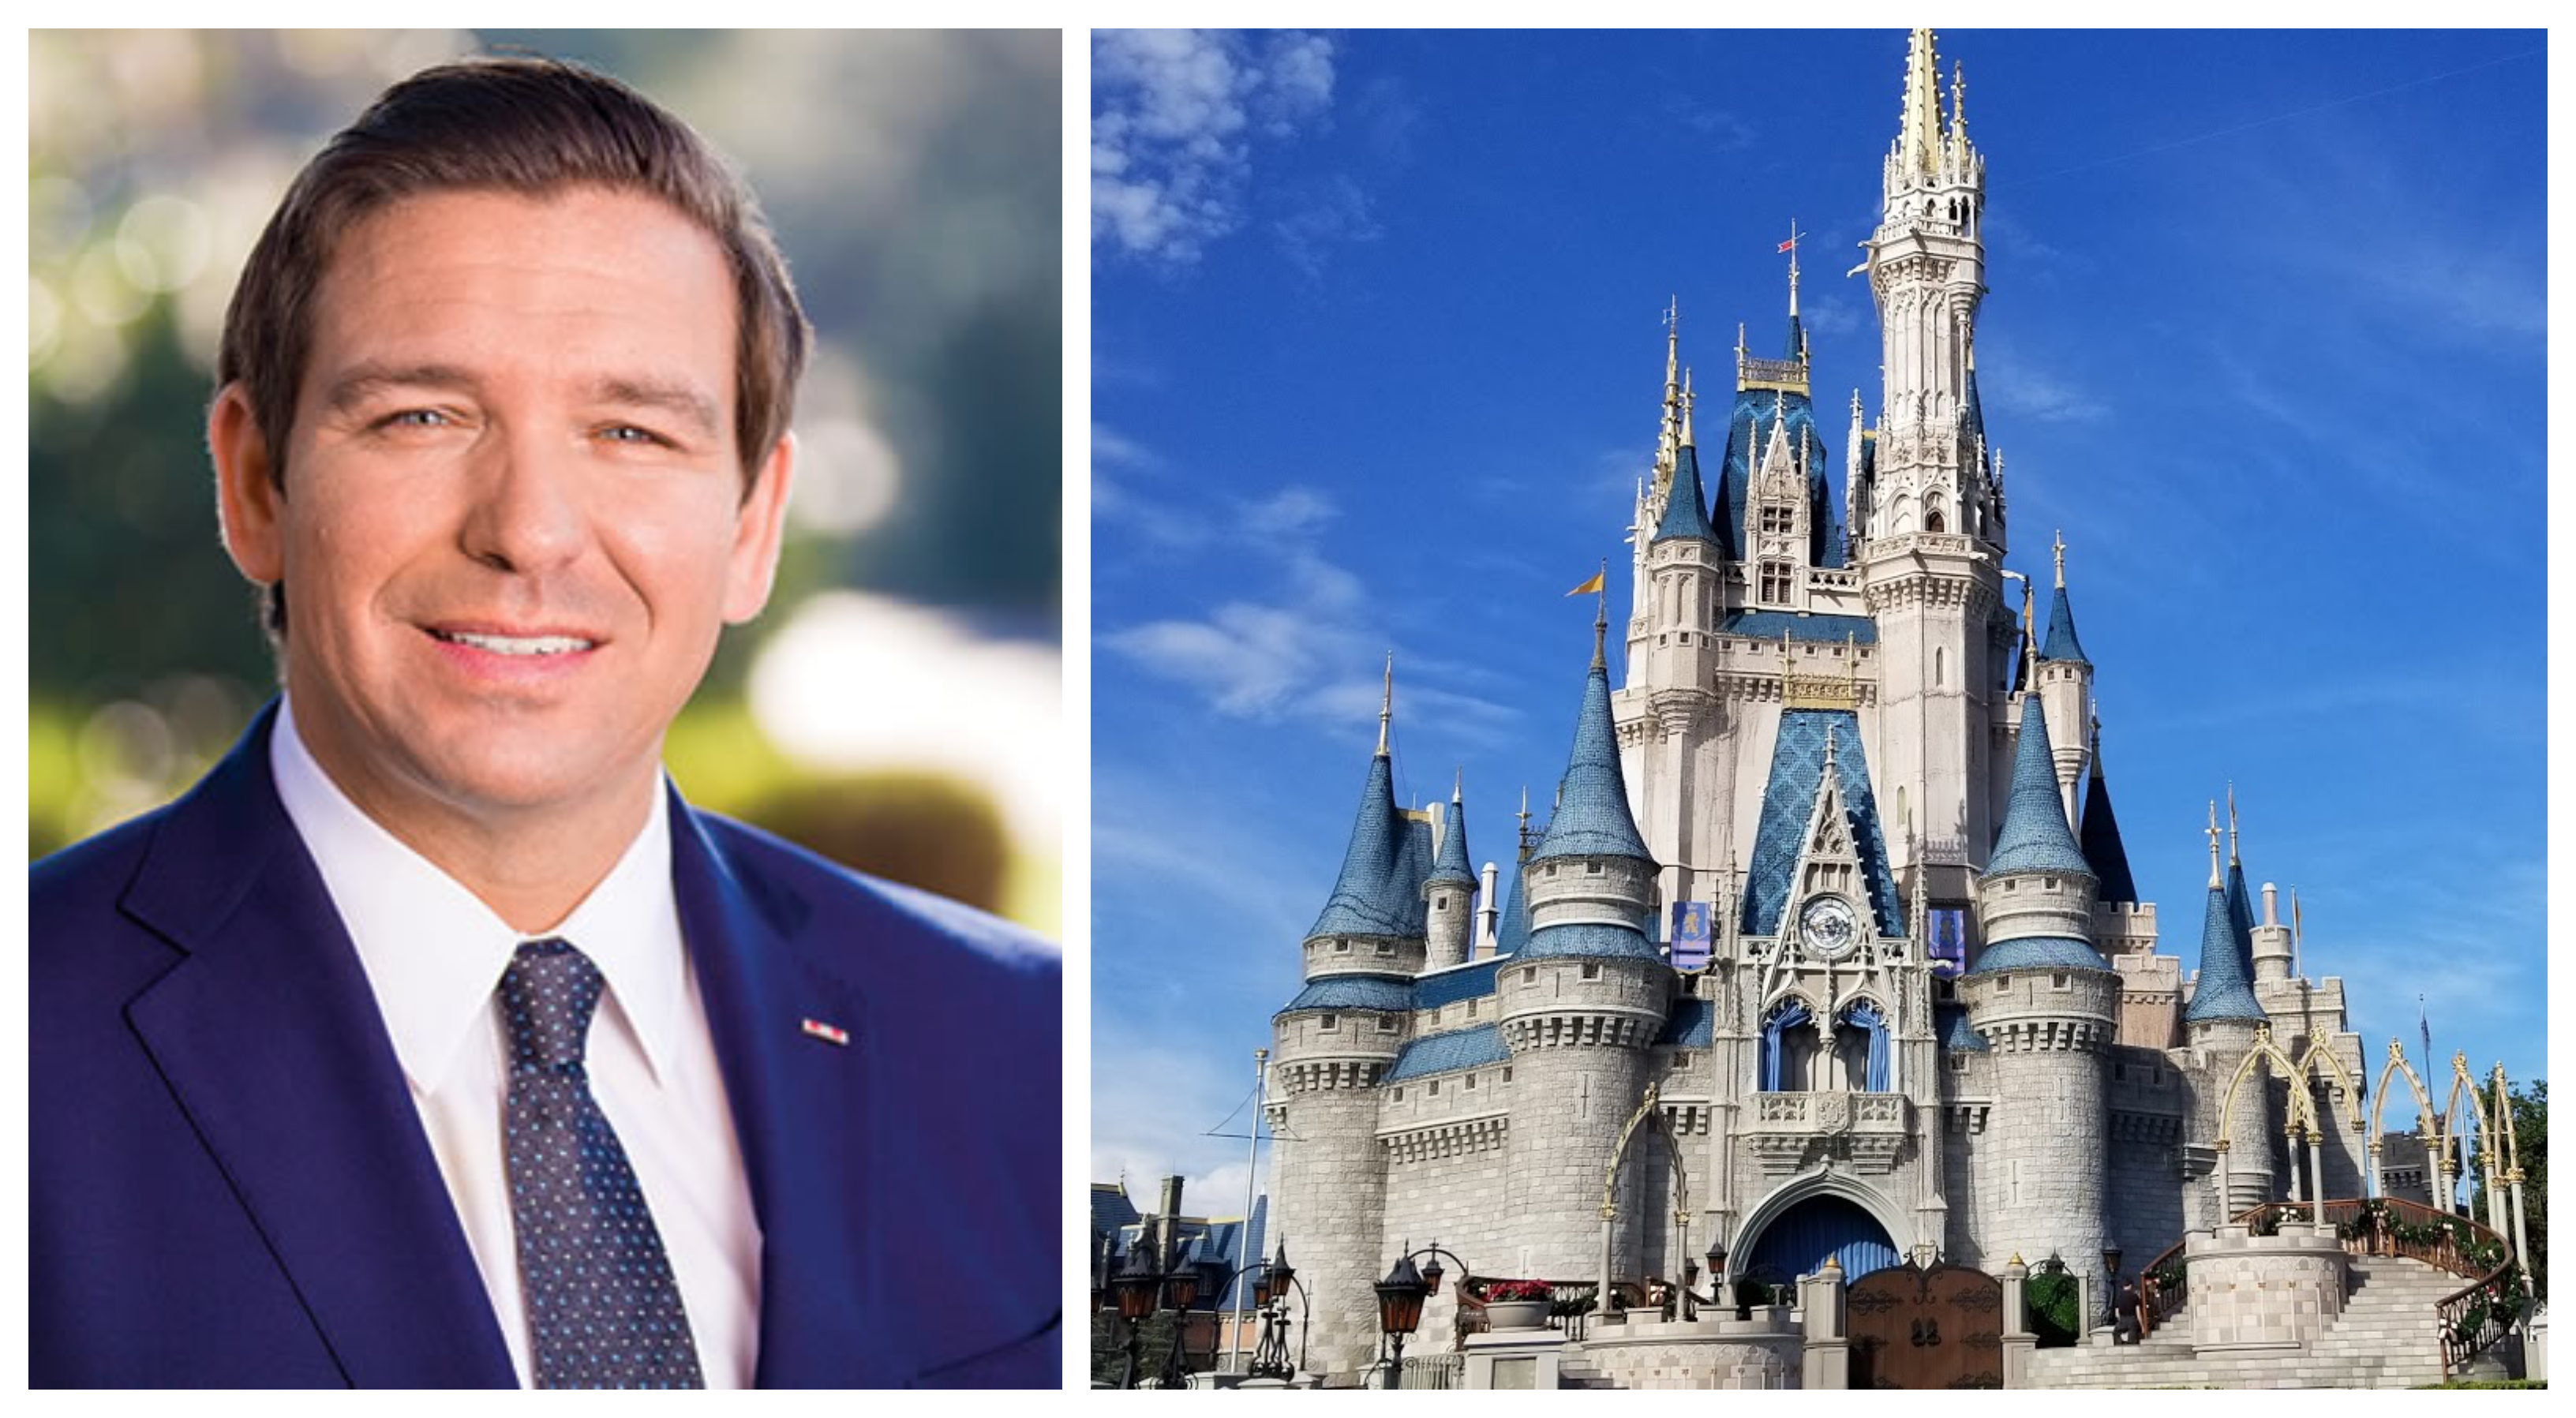 Florida Governor said that Disney World is Far Ahead of the Curve on reopening